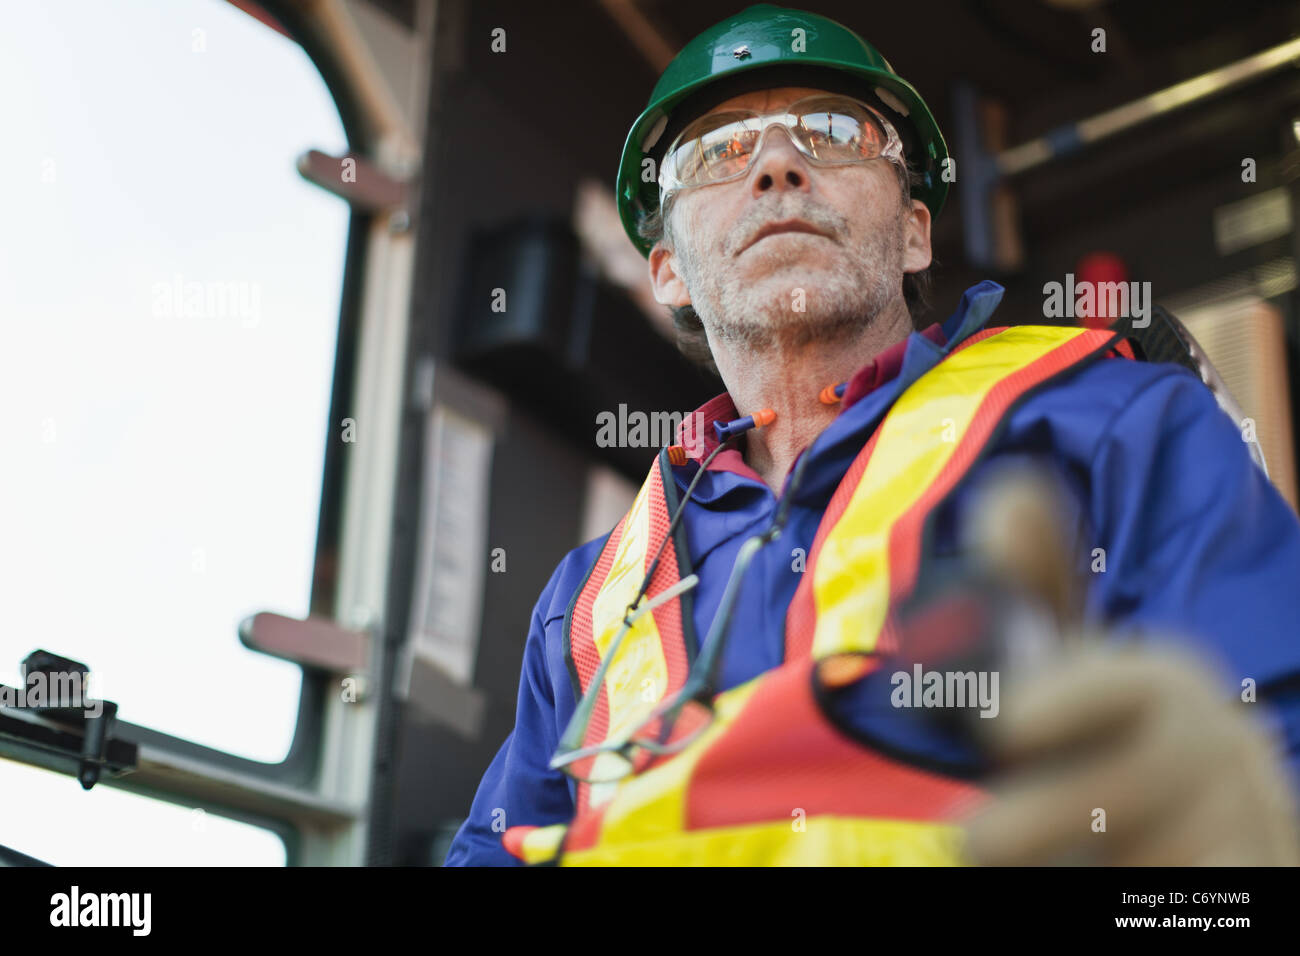 Worker operating machinery on oil rig Stock Photo